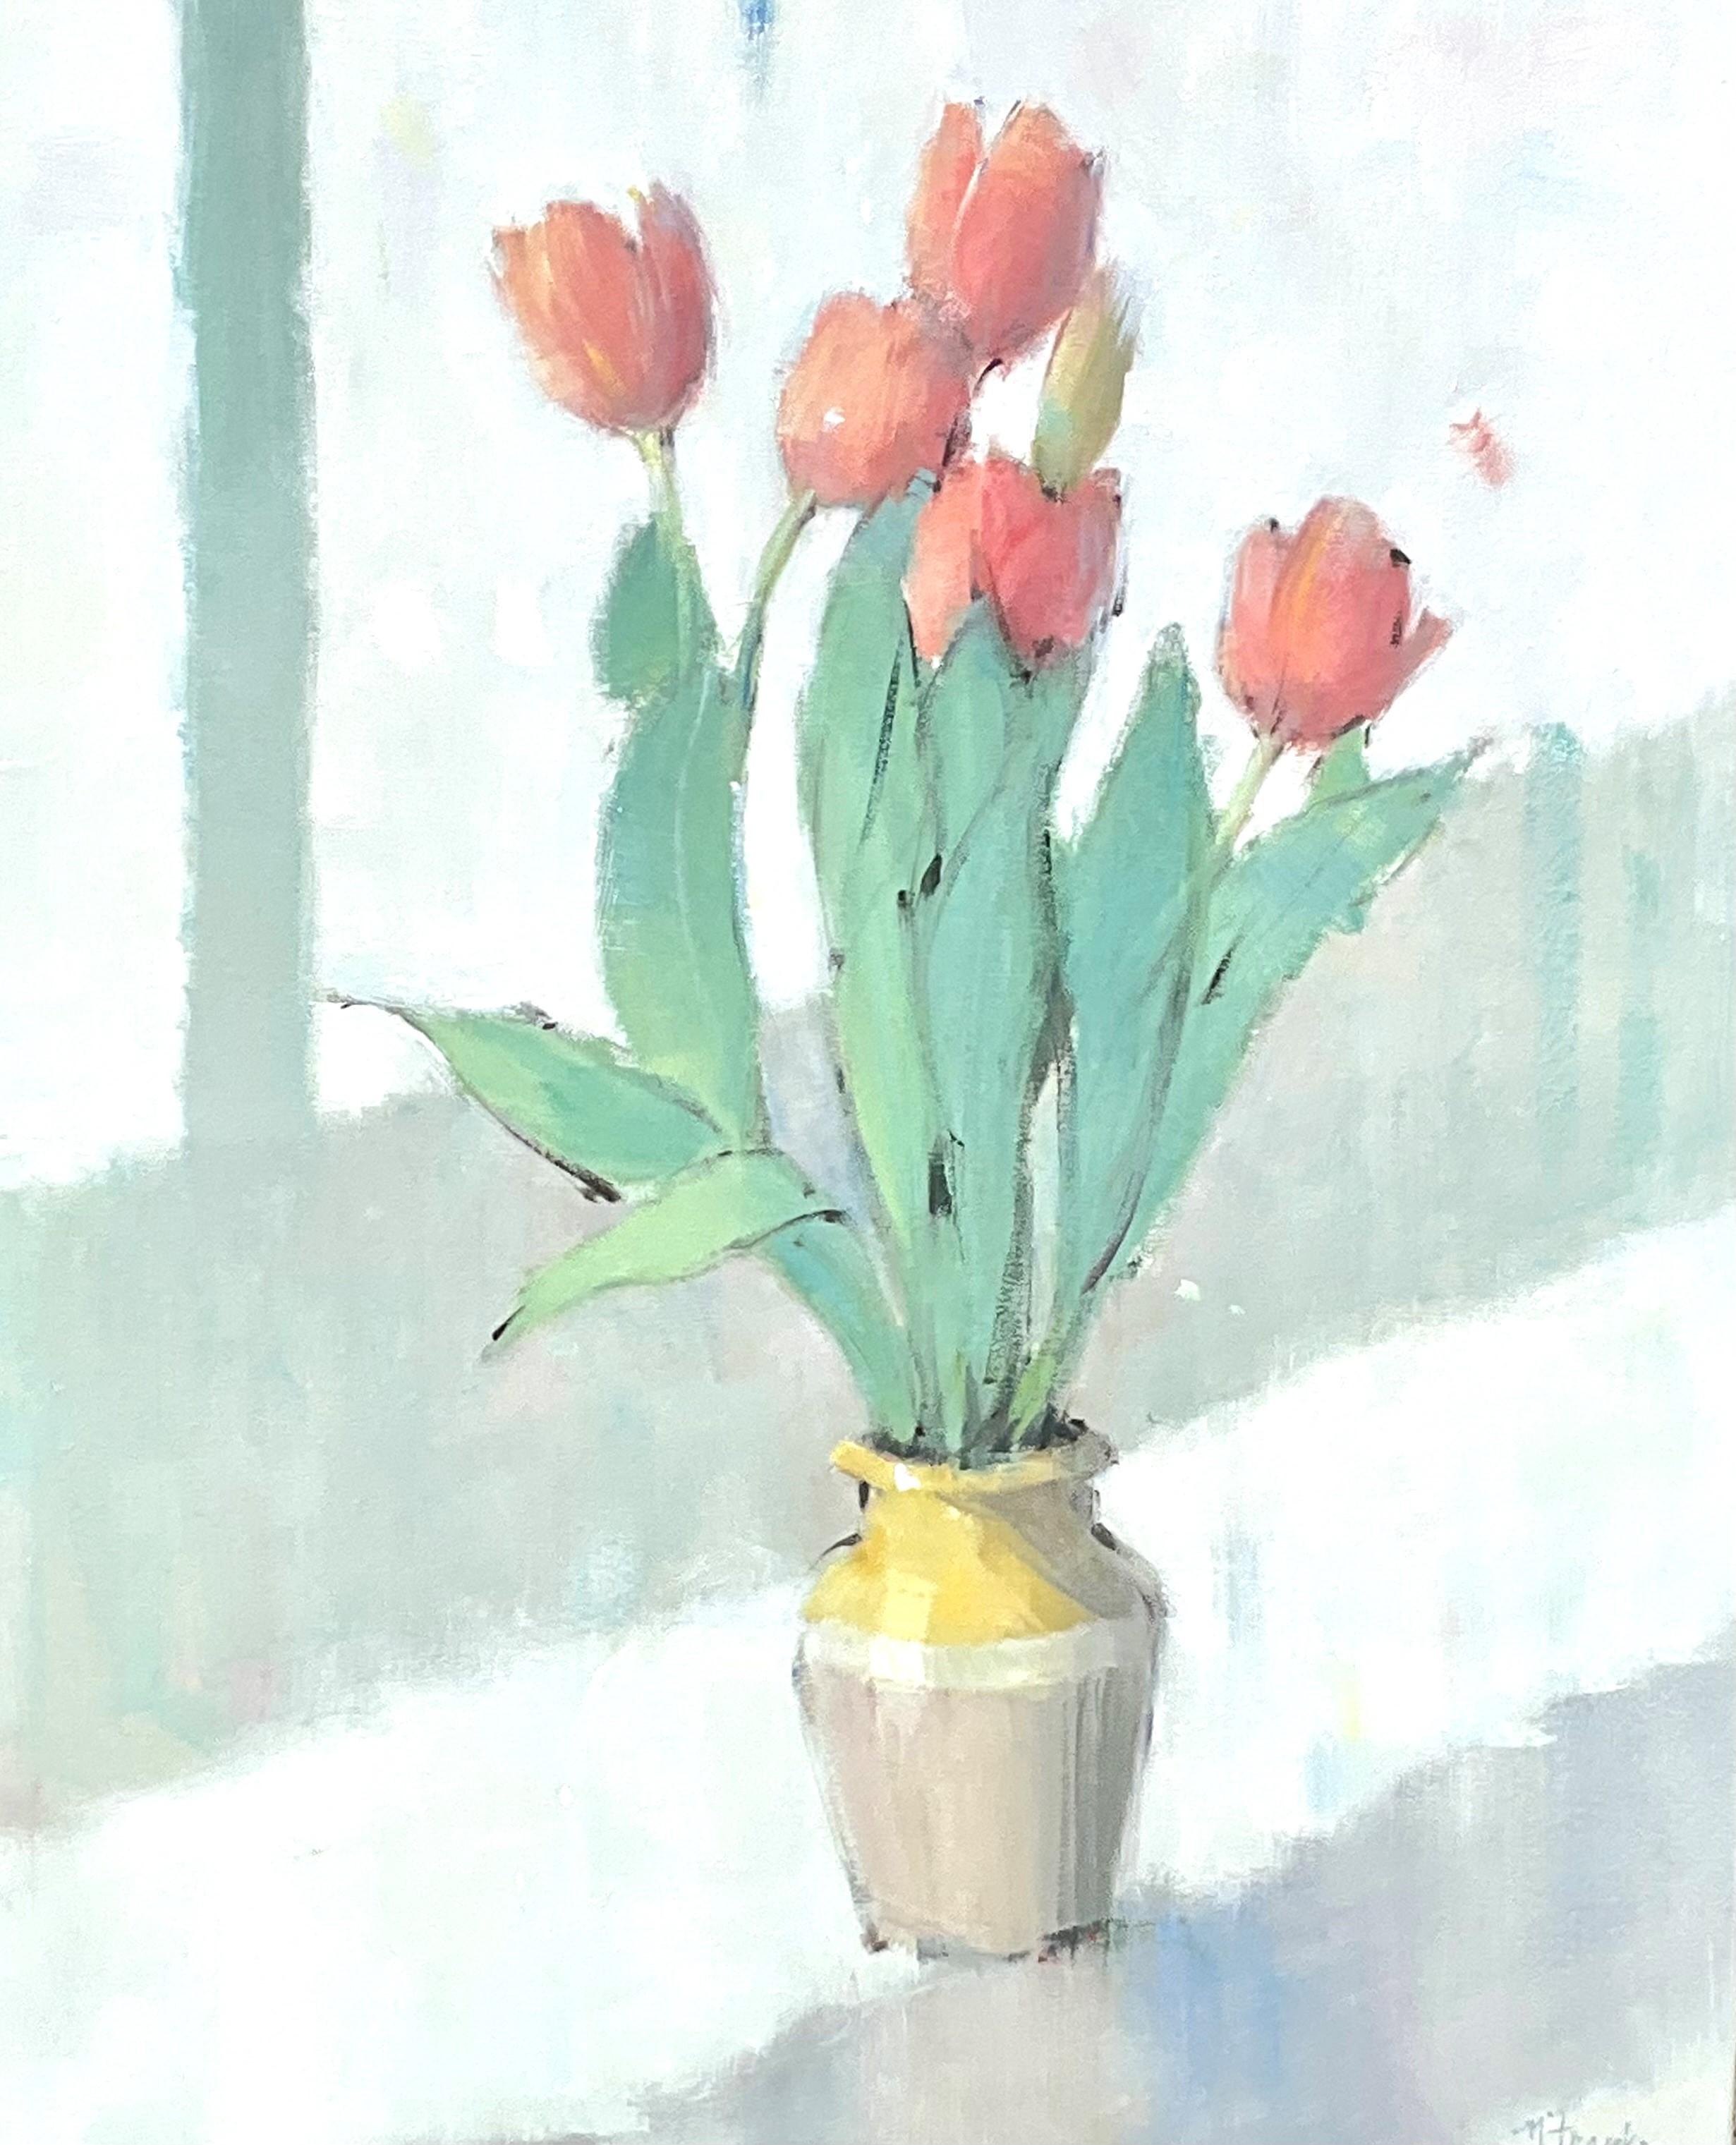 Franke focuses on still life and figurative paintings, although she has also done some wonderful landscapes and pet portraits as well. With the looseness and spontaneity of her technique, Franke’s paintings are warm, inviting and intimate. Her own